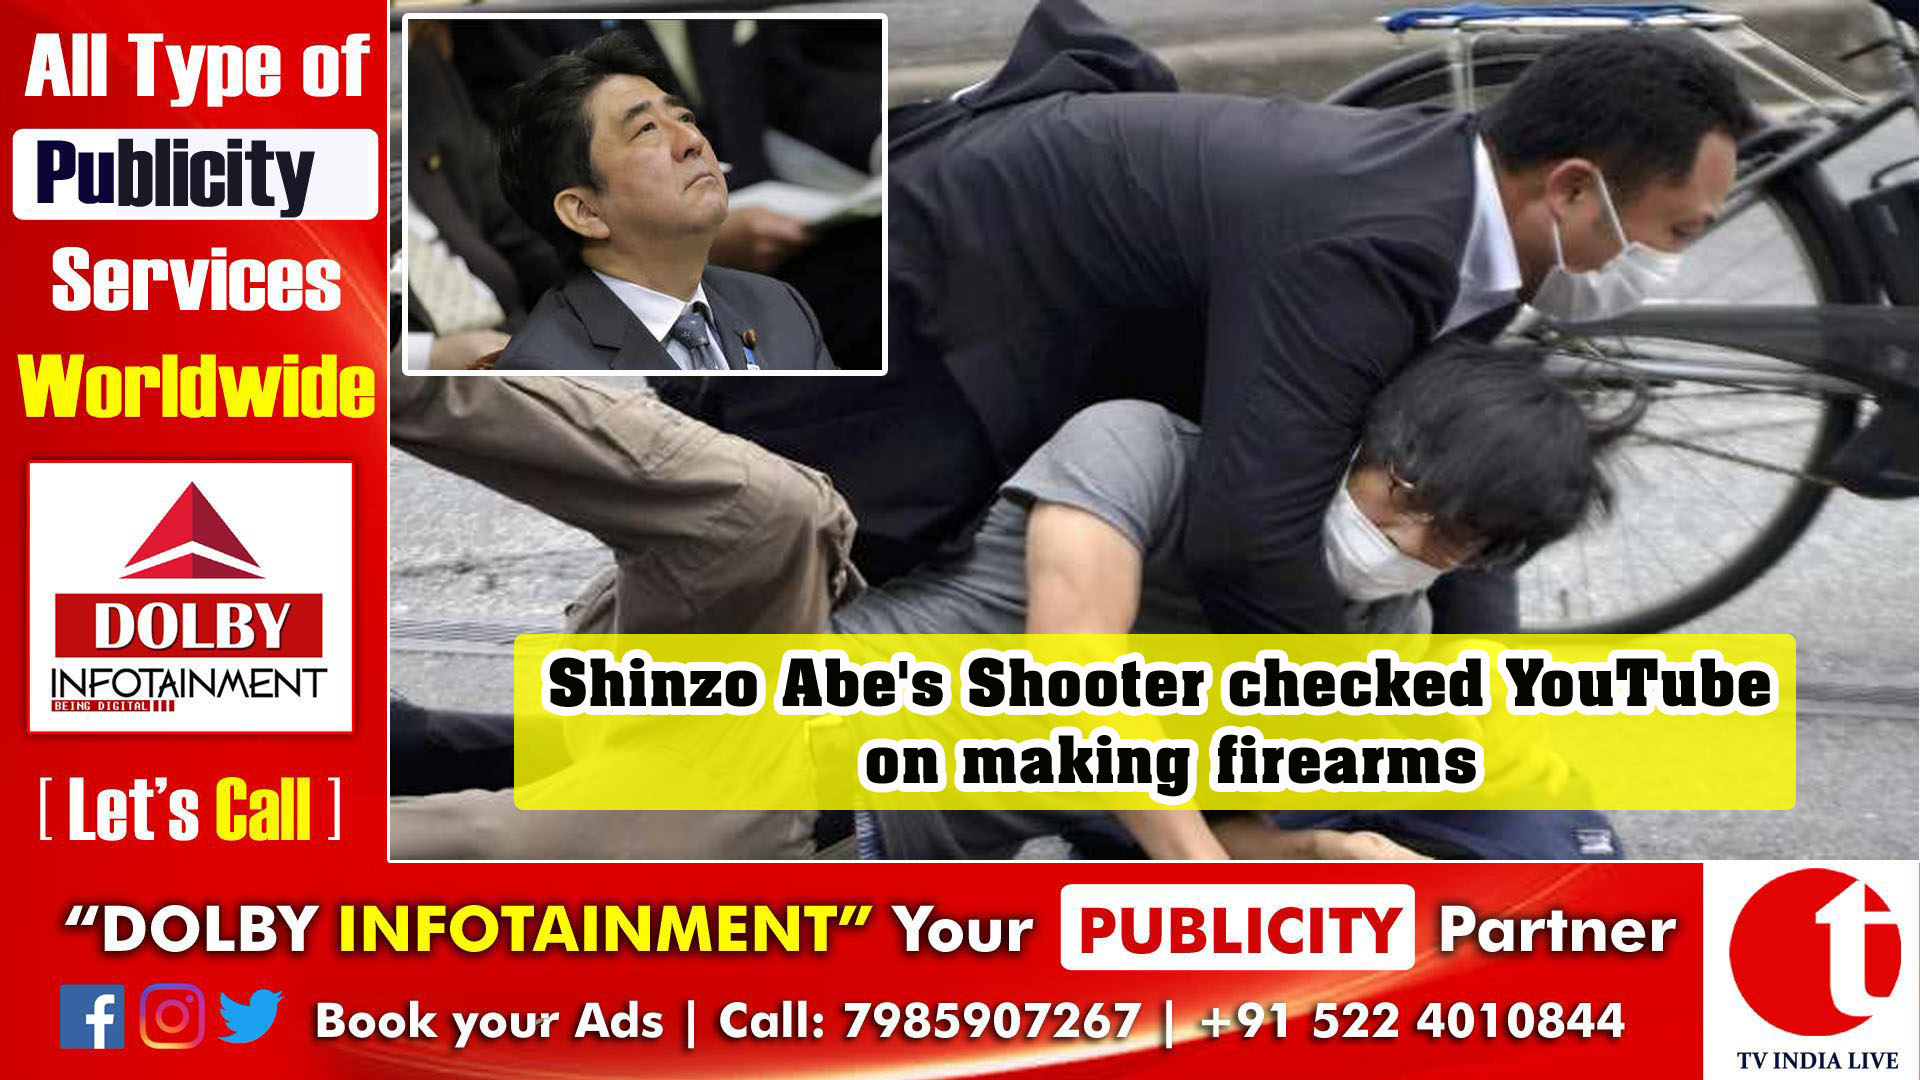 Shinzo Abe's Shooter checked YouTube on making firearms